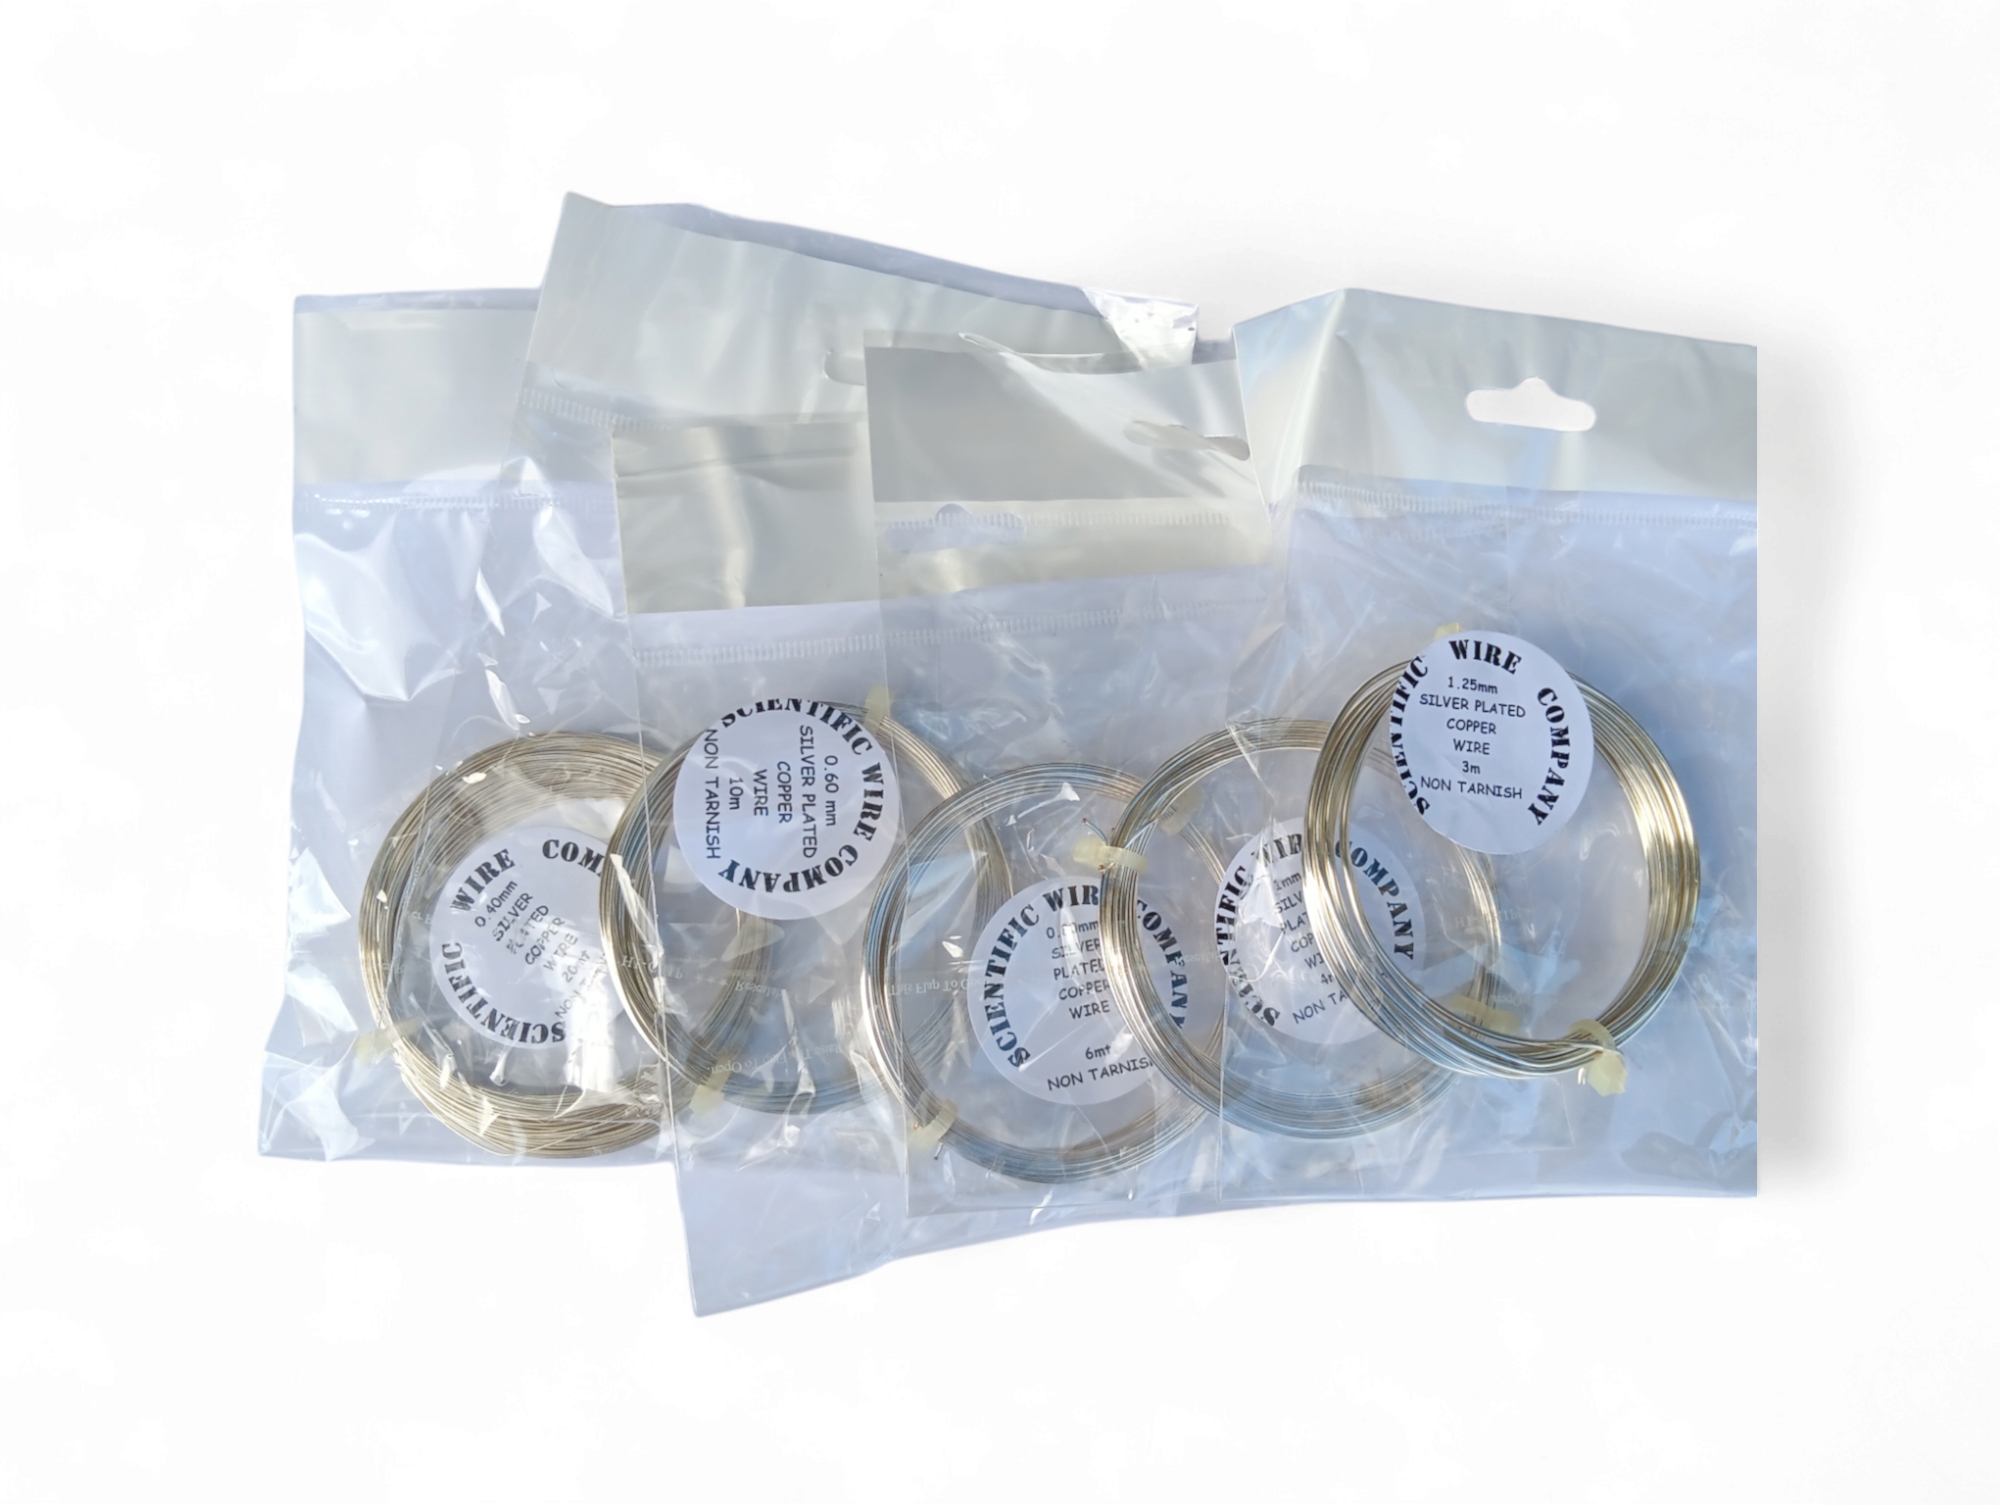 NON TARNISH Silver Plated Sample 6 PACK     0.4mm / 0.6mm / 0.8mm / 1mm / 1.25mm 1.50mm Coils